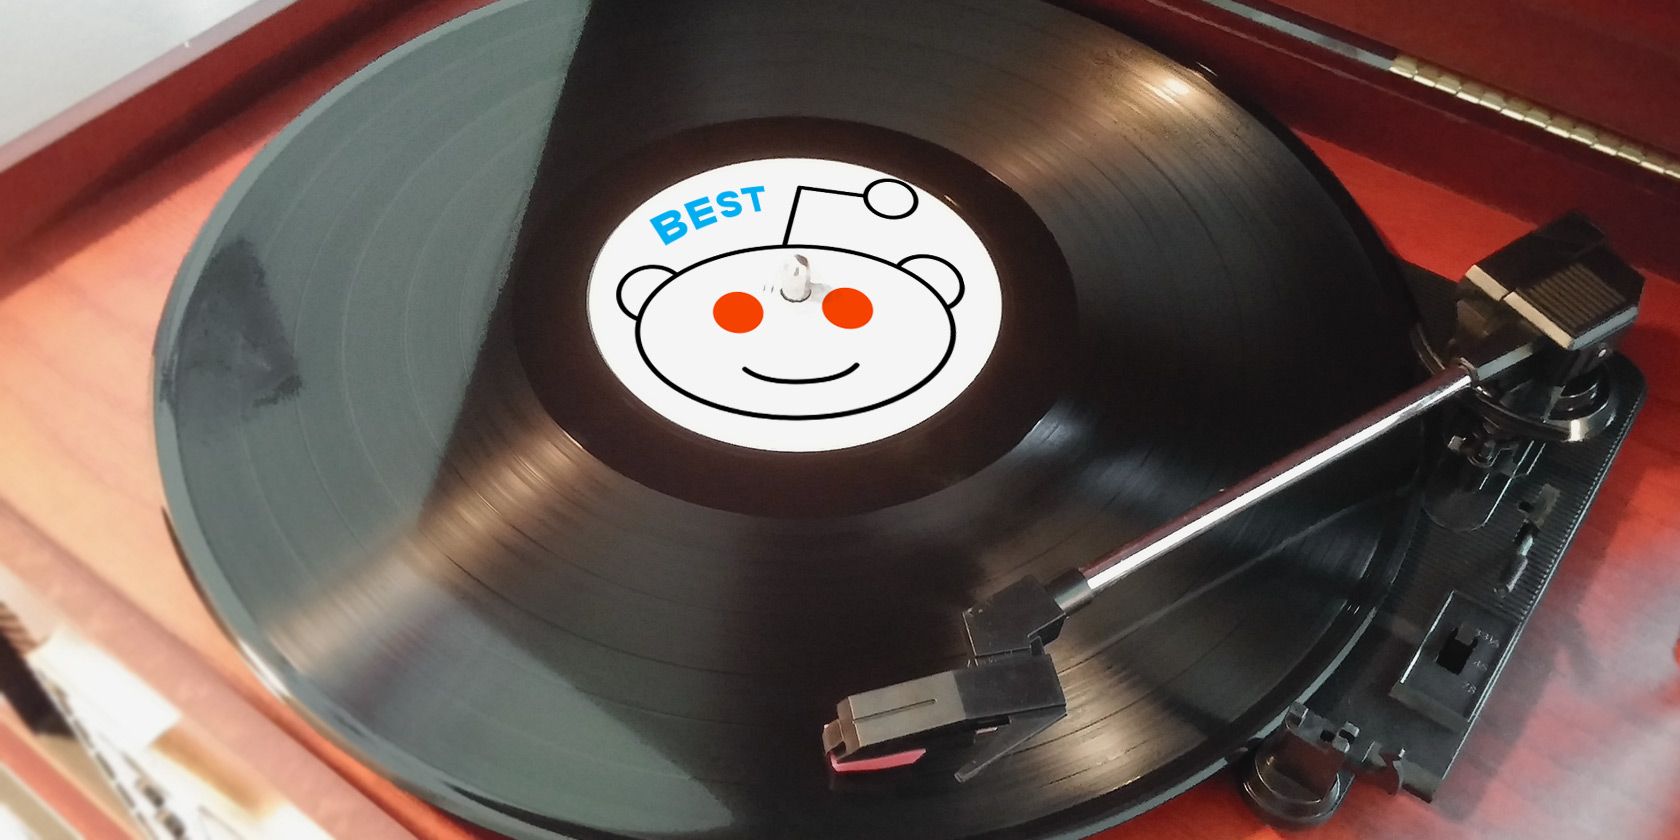 The Best Albums of All Time, as Chosen by Reddit